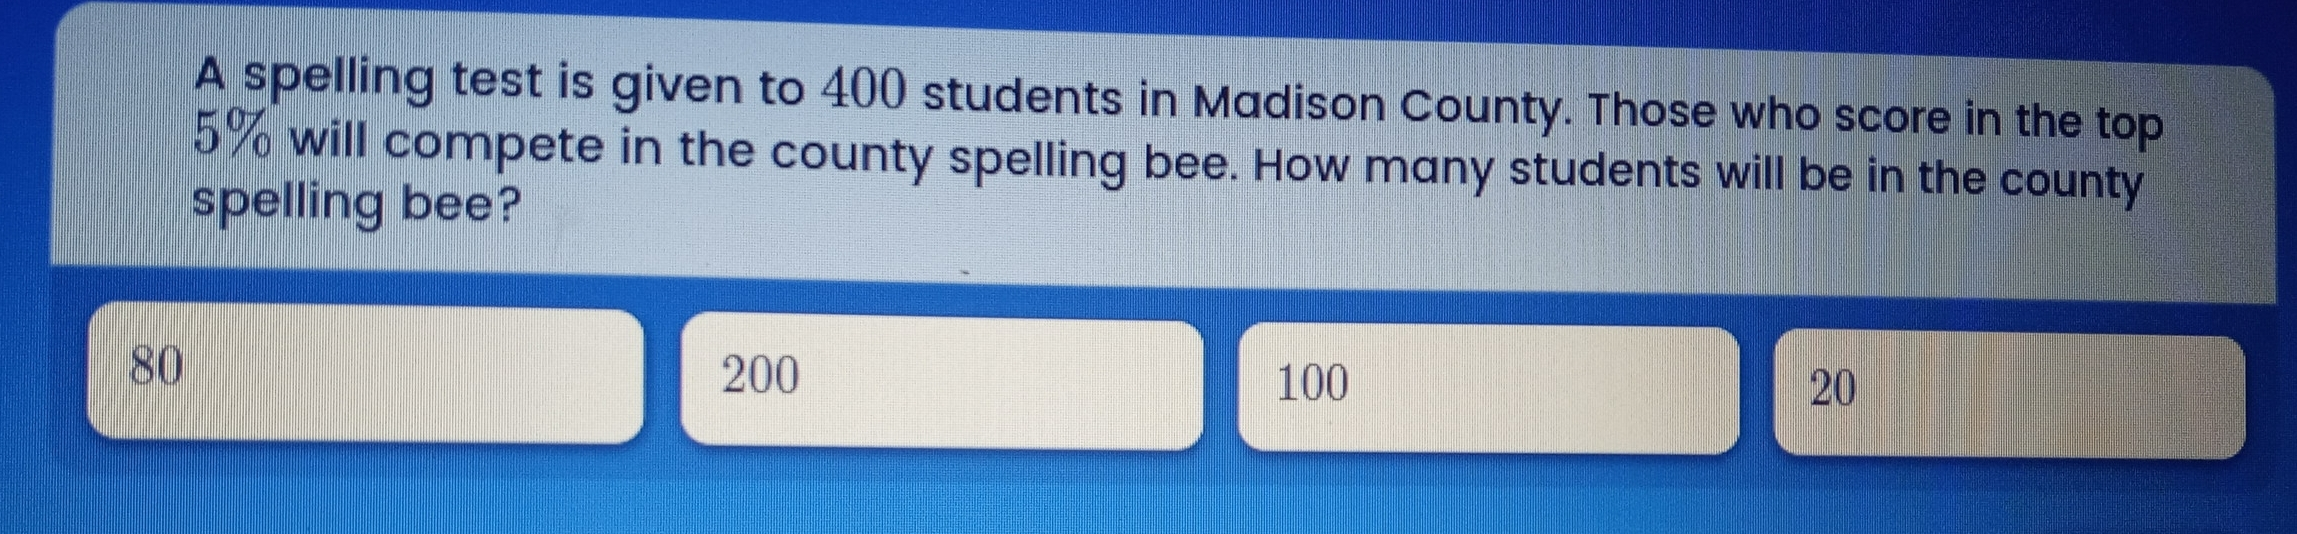 A spelling test is given to 400 students in Madison County. Those who score in the top 5% will compete in the county spelling bee. How many students will be in the county spelling bee?